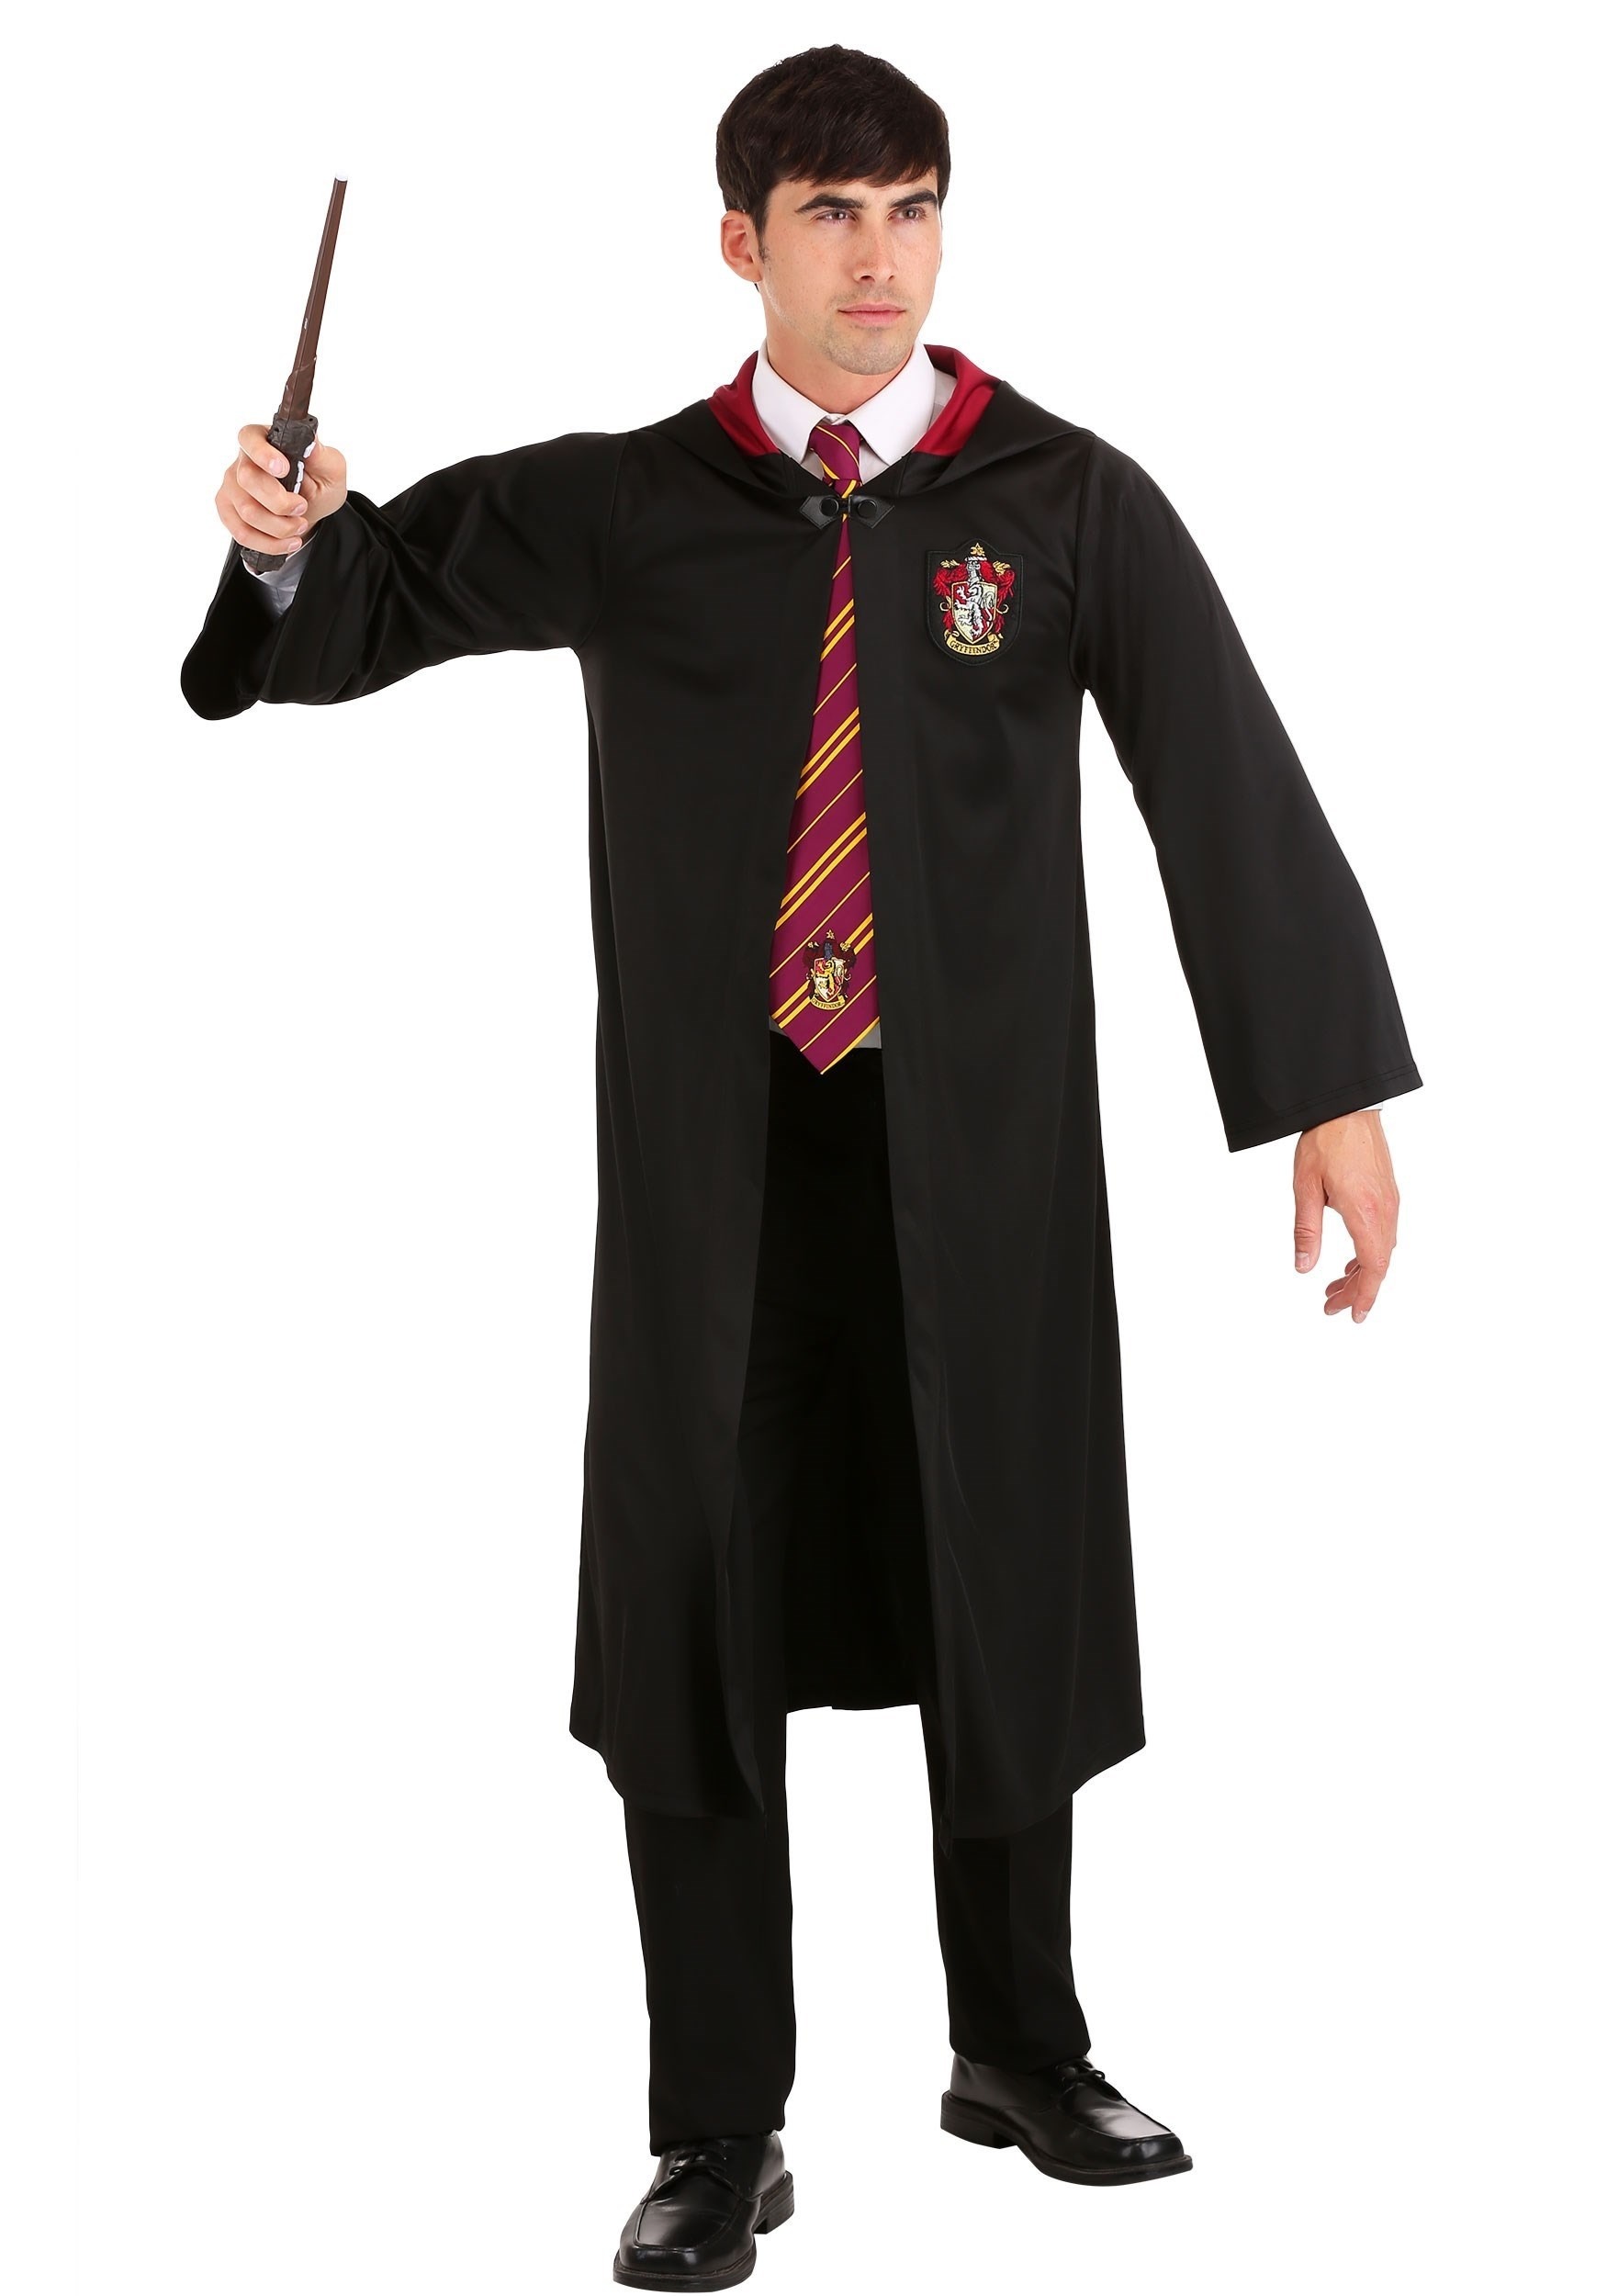 Photos - Fancy Dress Potter FUN Costumes Harry  Gryffindor Robe for Adults Black/Blue FUN168 